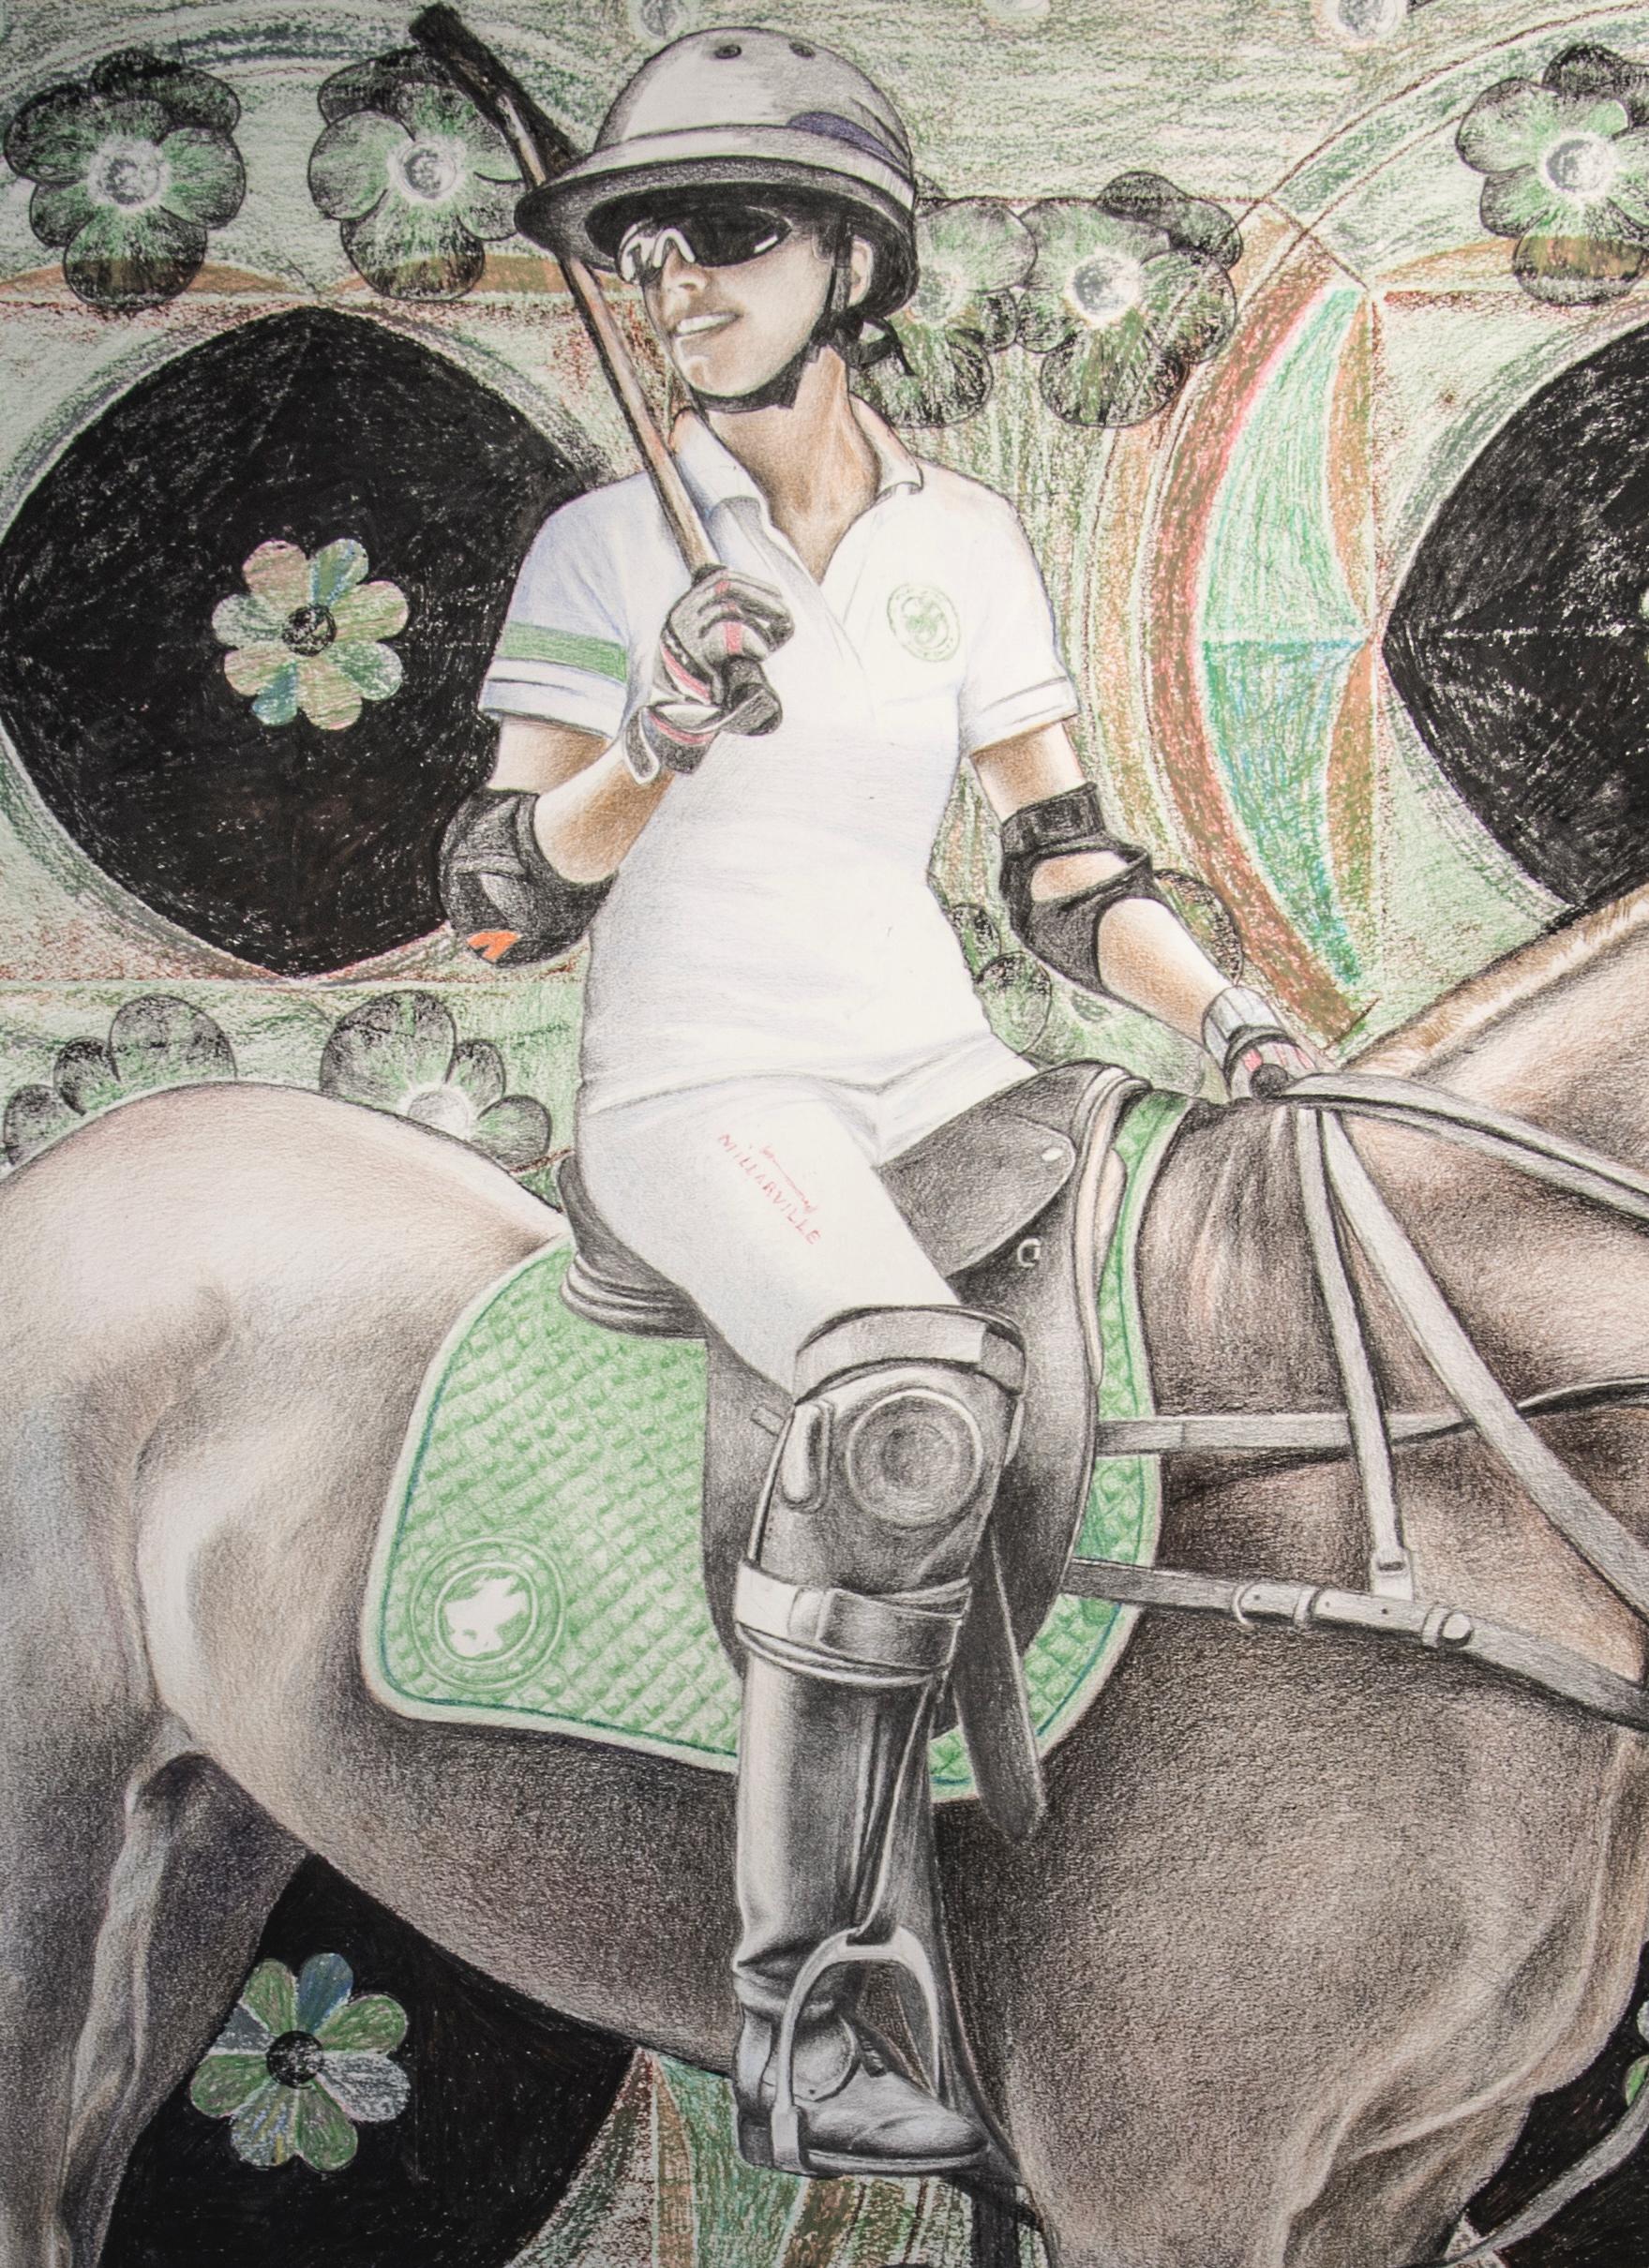 Polo Player - Contemporary Figurative Elaborate Large Format Drawing, Horse - Painting by Anna Malinowska